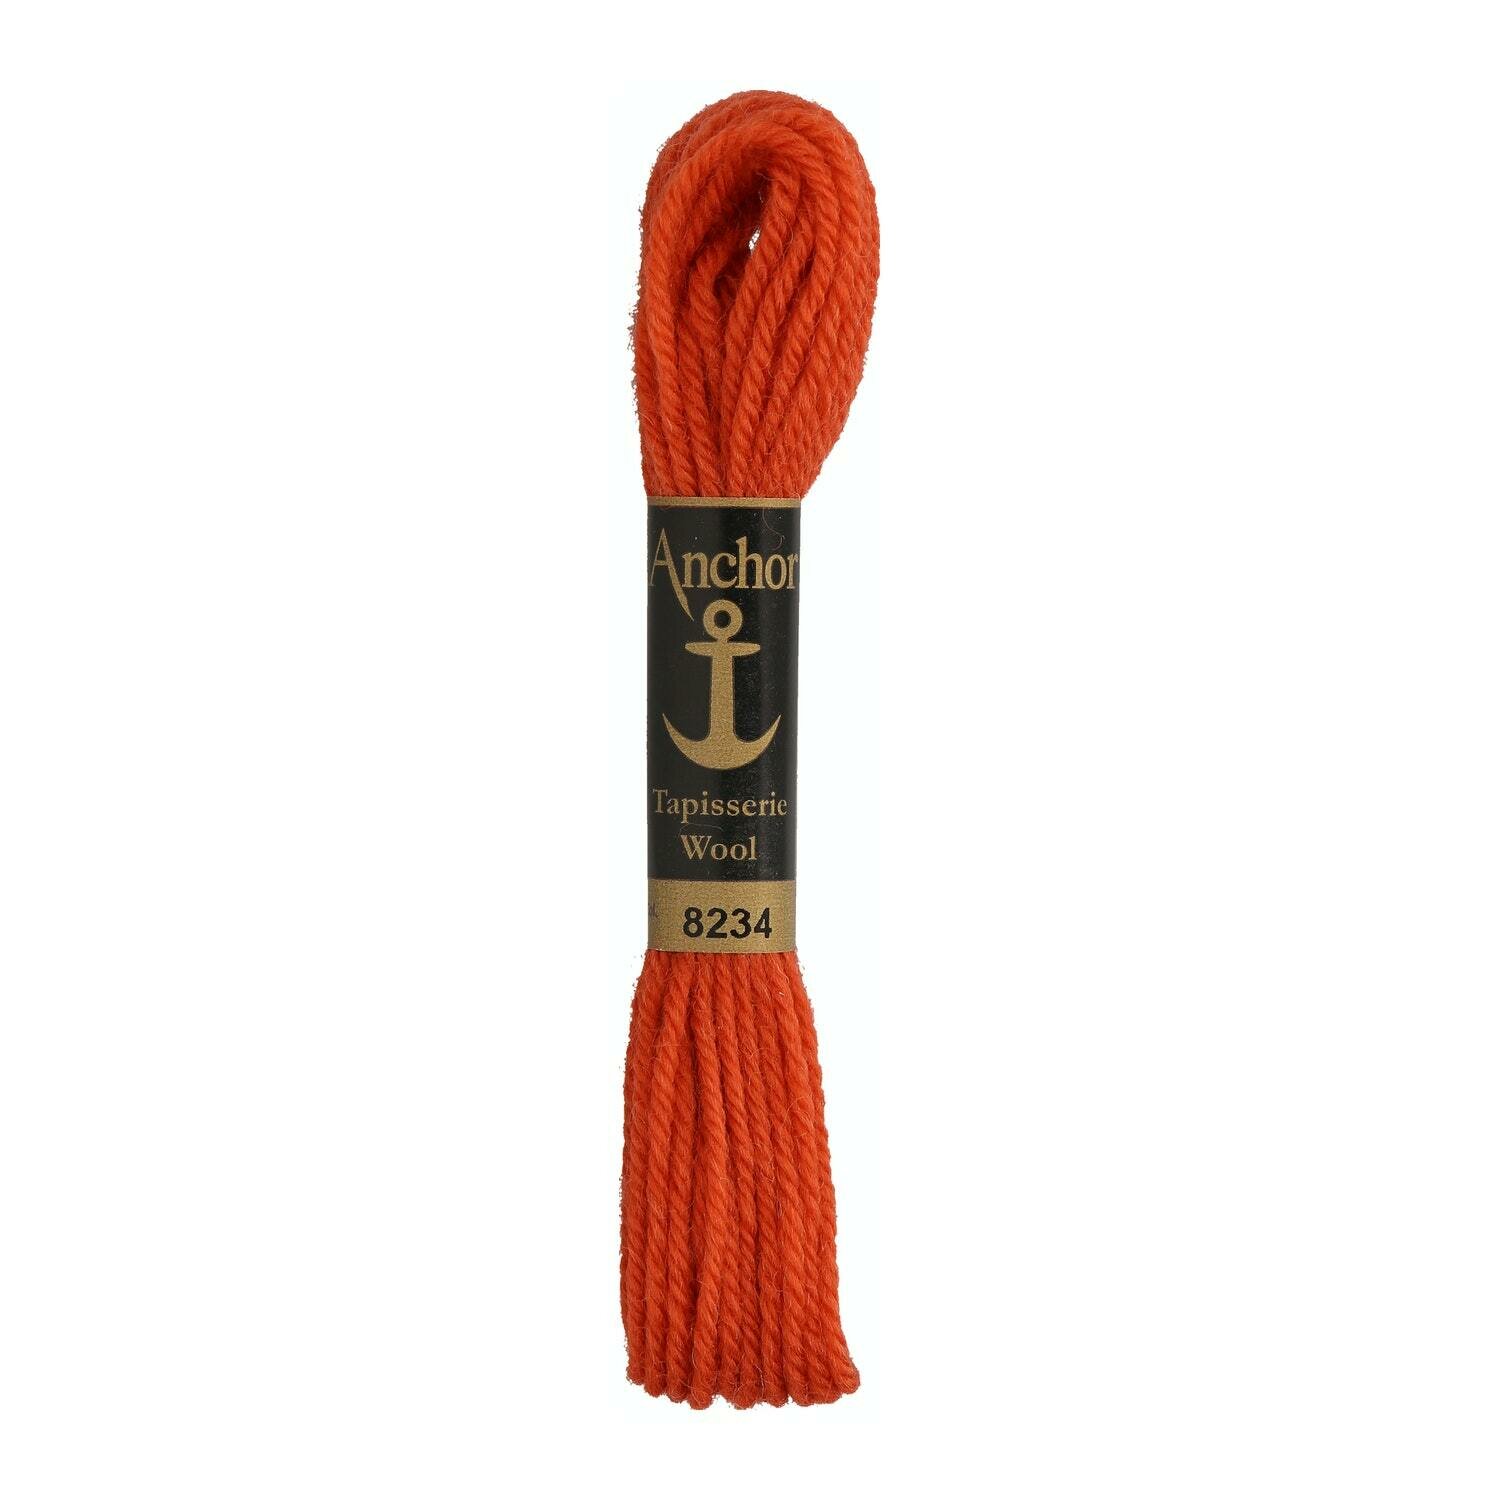 Anchor Tapisserie Wool #  08234